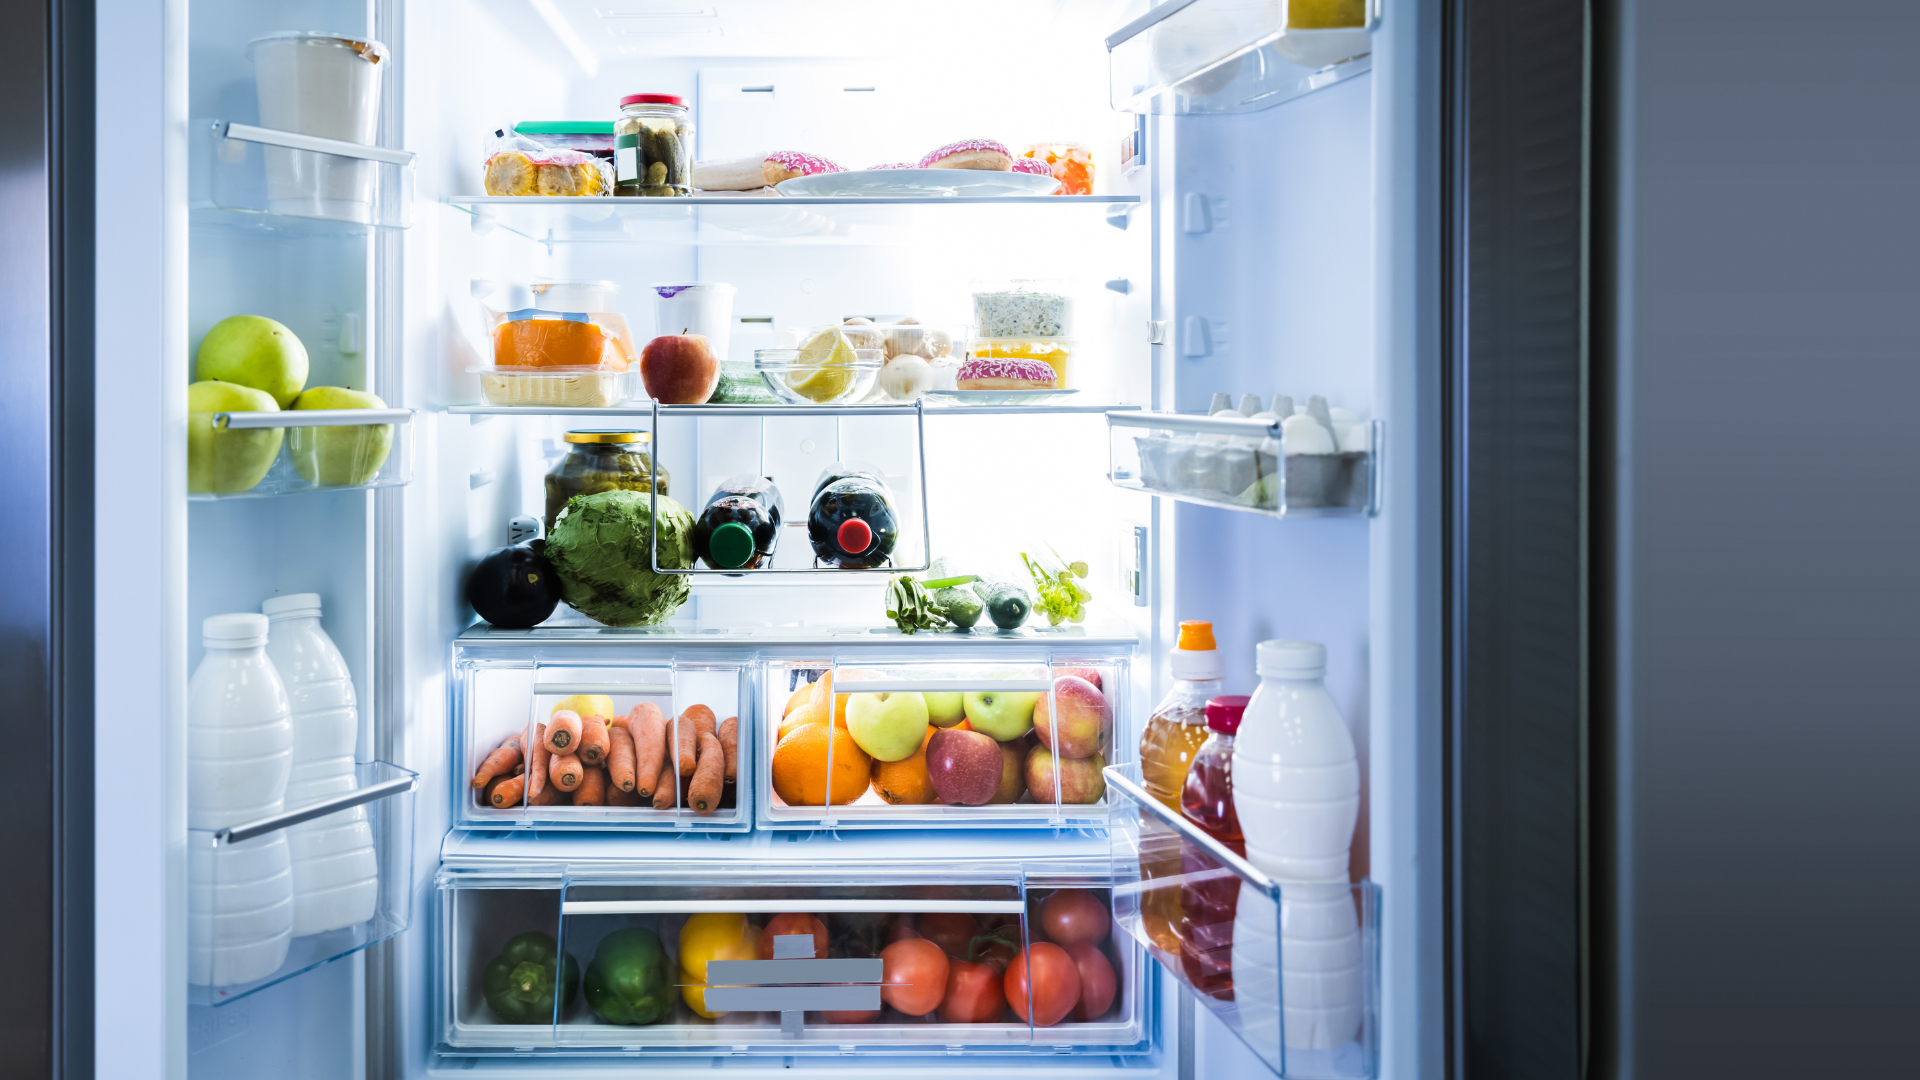 5 secret tips to save energy in your refrigerator that no one tells you!